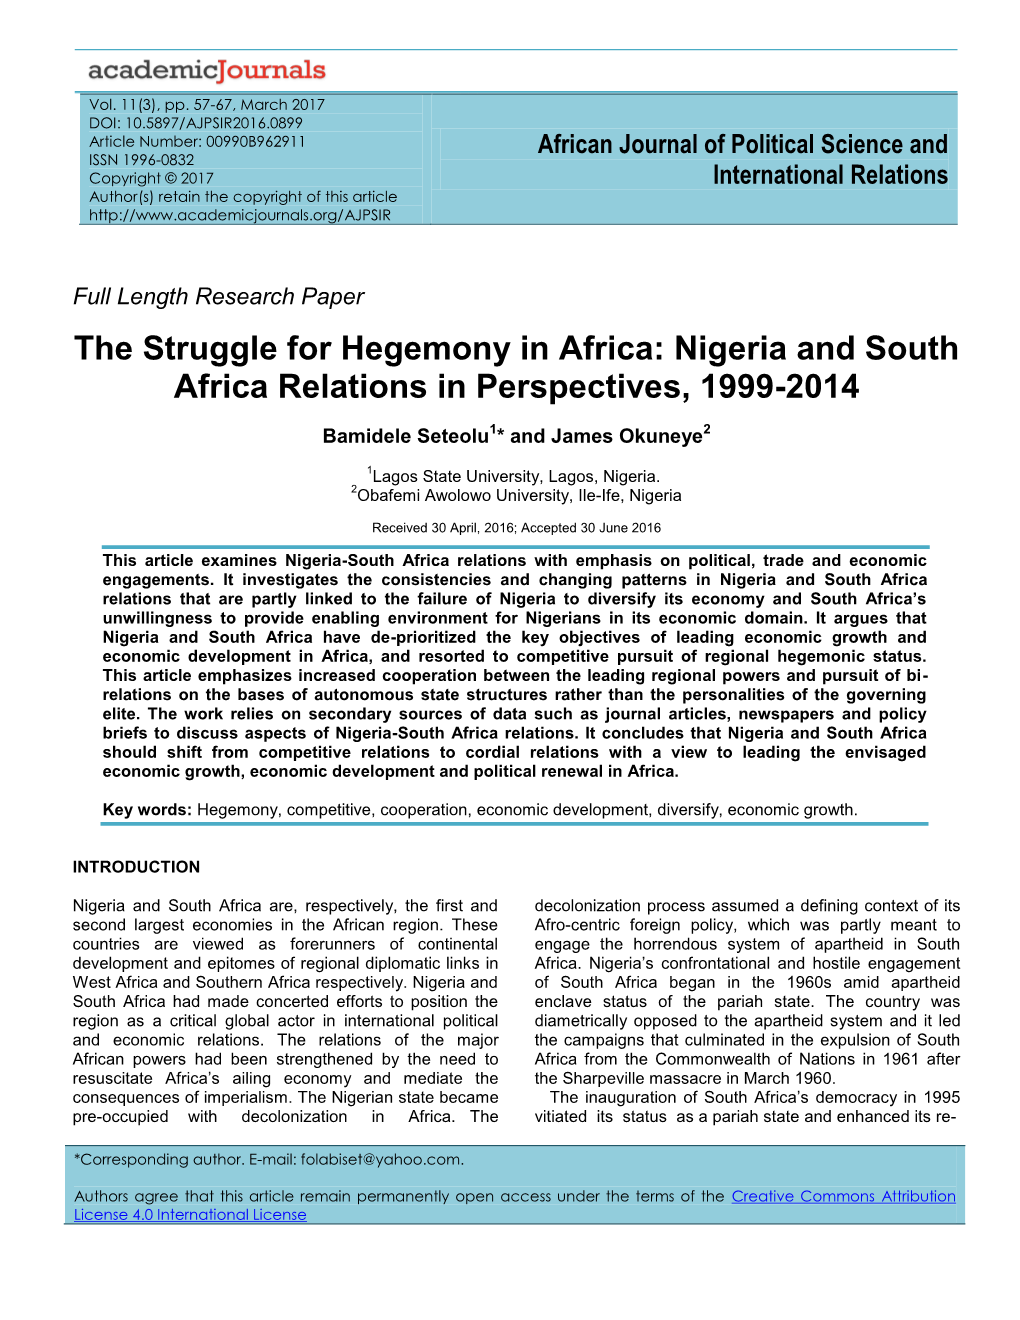 Nigeria and South Africa Relations in Perspectives, 1999-2014